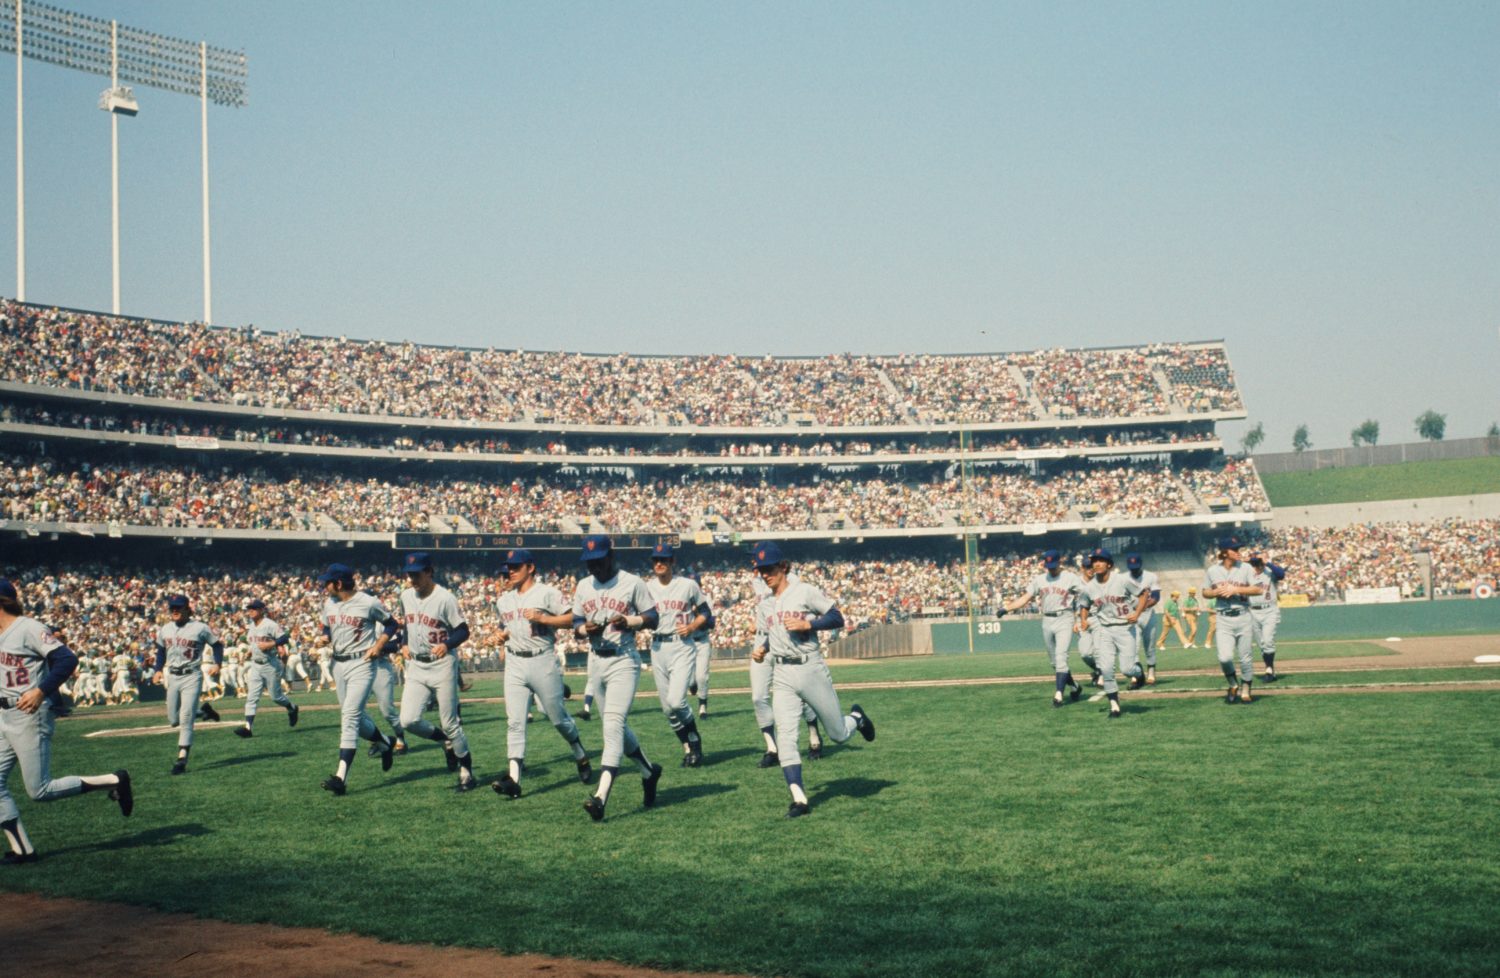 Mets Leave the Field in 1973 World Series